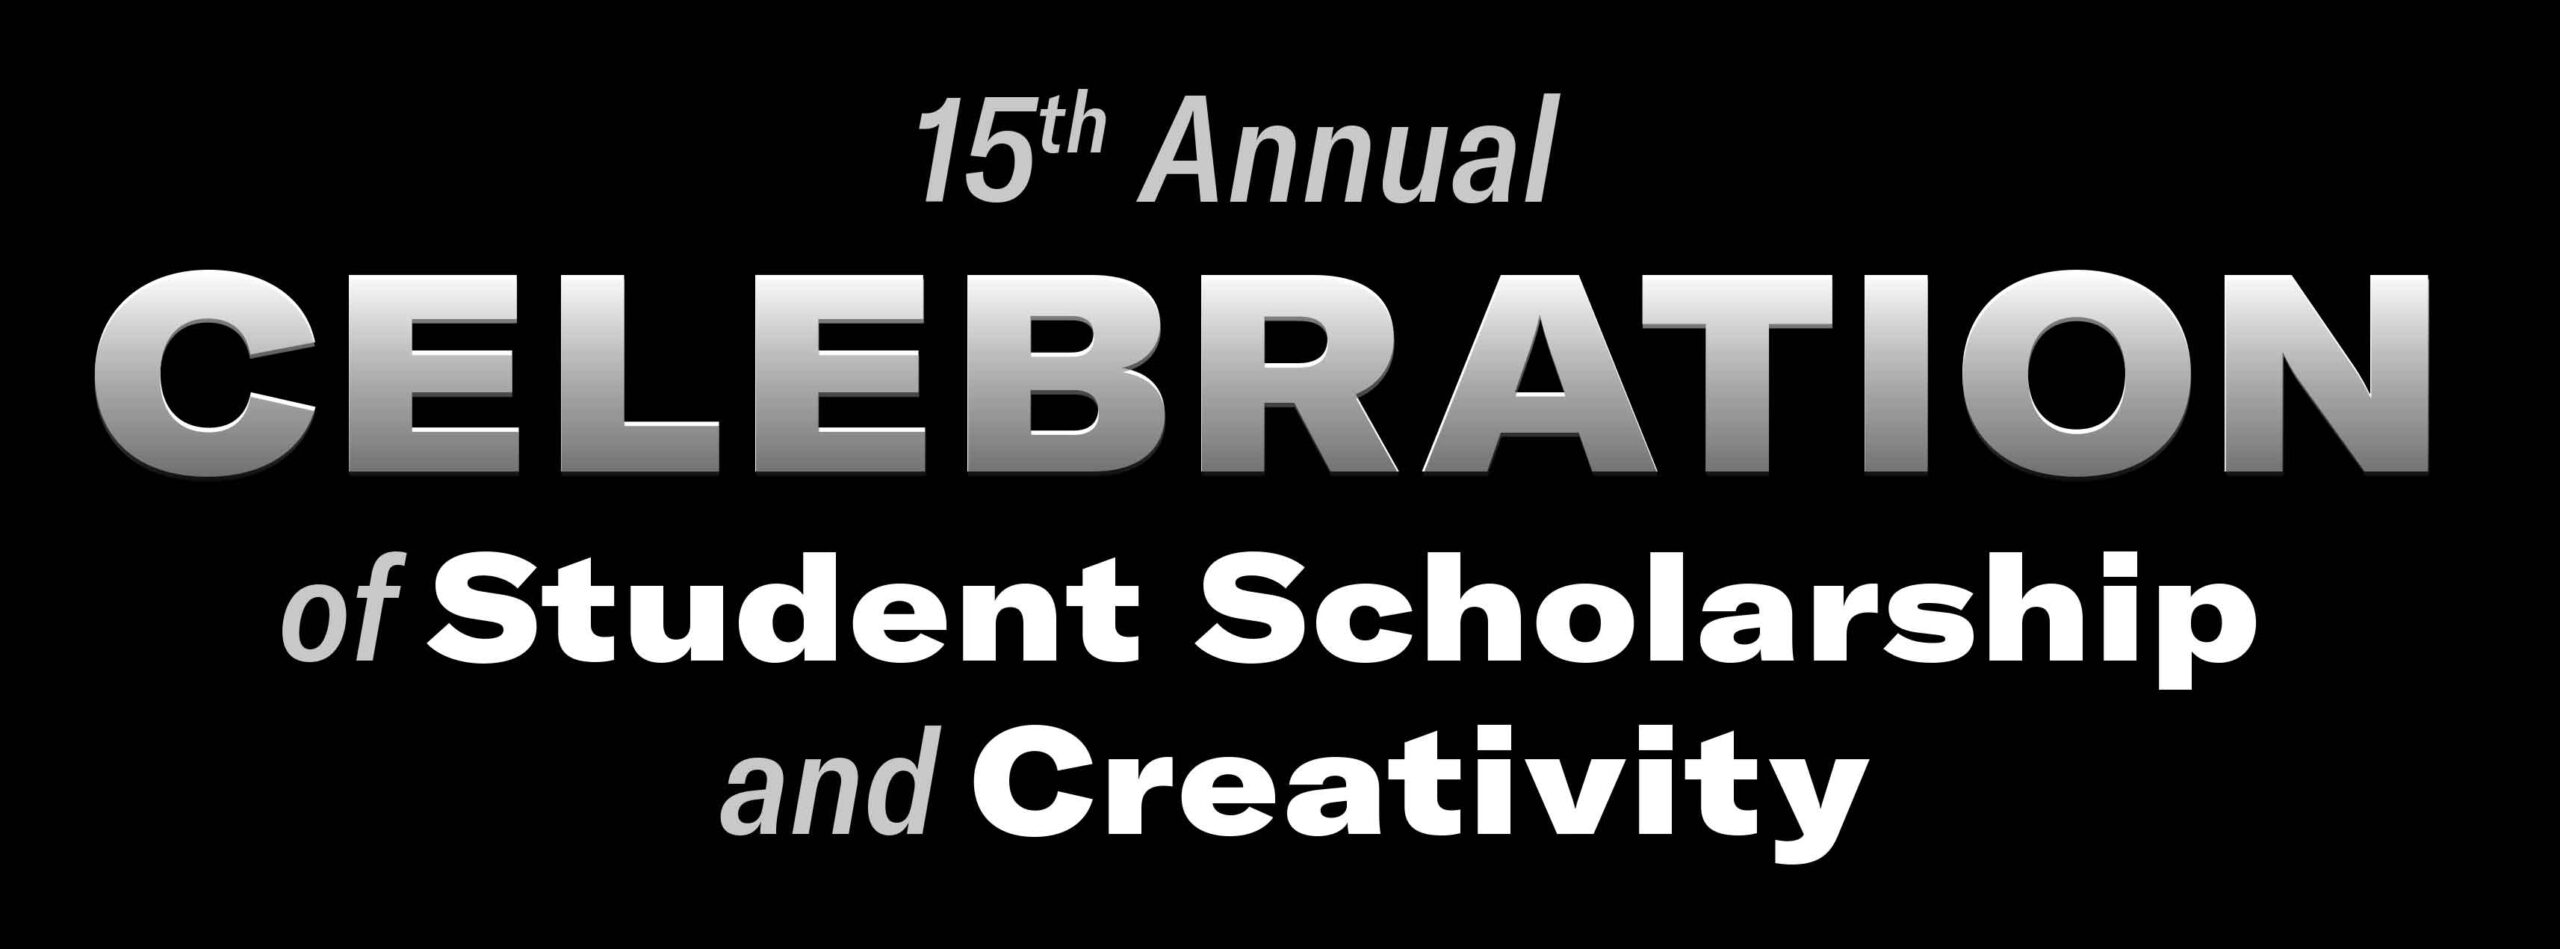 15th Annual Celebration of Student Scholarship and Creativity